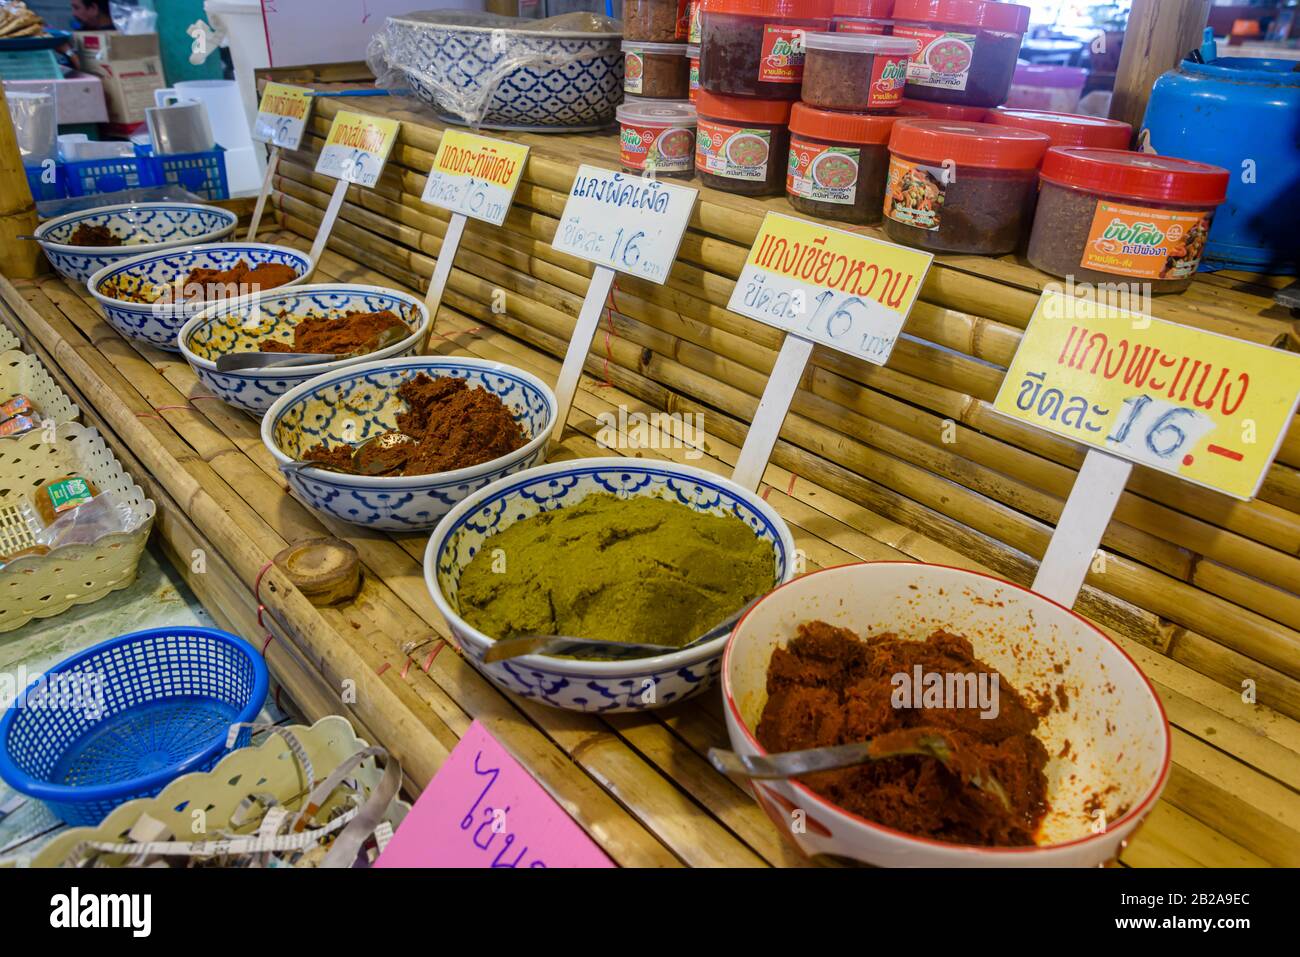 Bowls of homemade chili and spice paste for sale at a Thai food market stall, Thailand Stock Photo